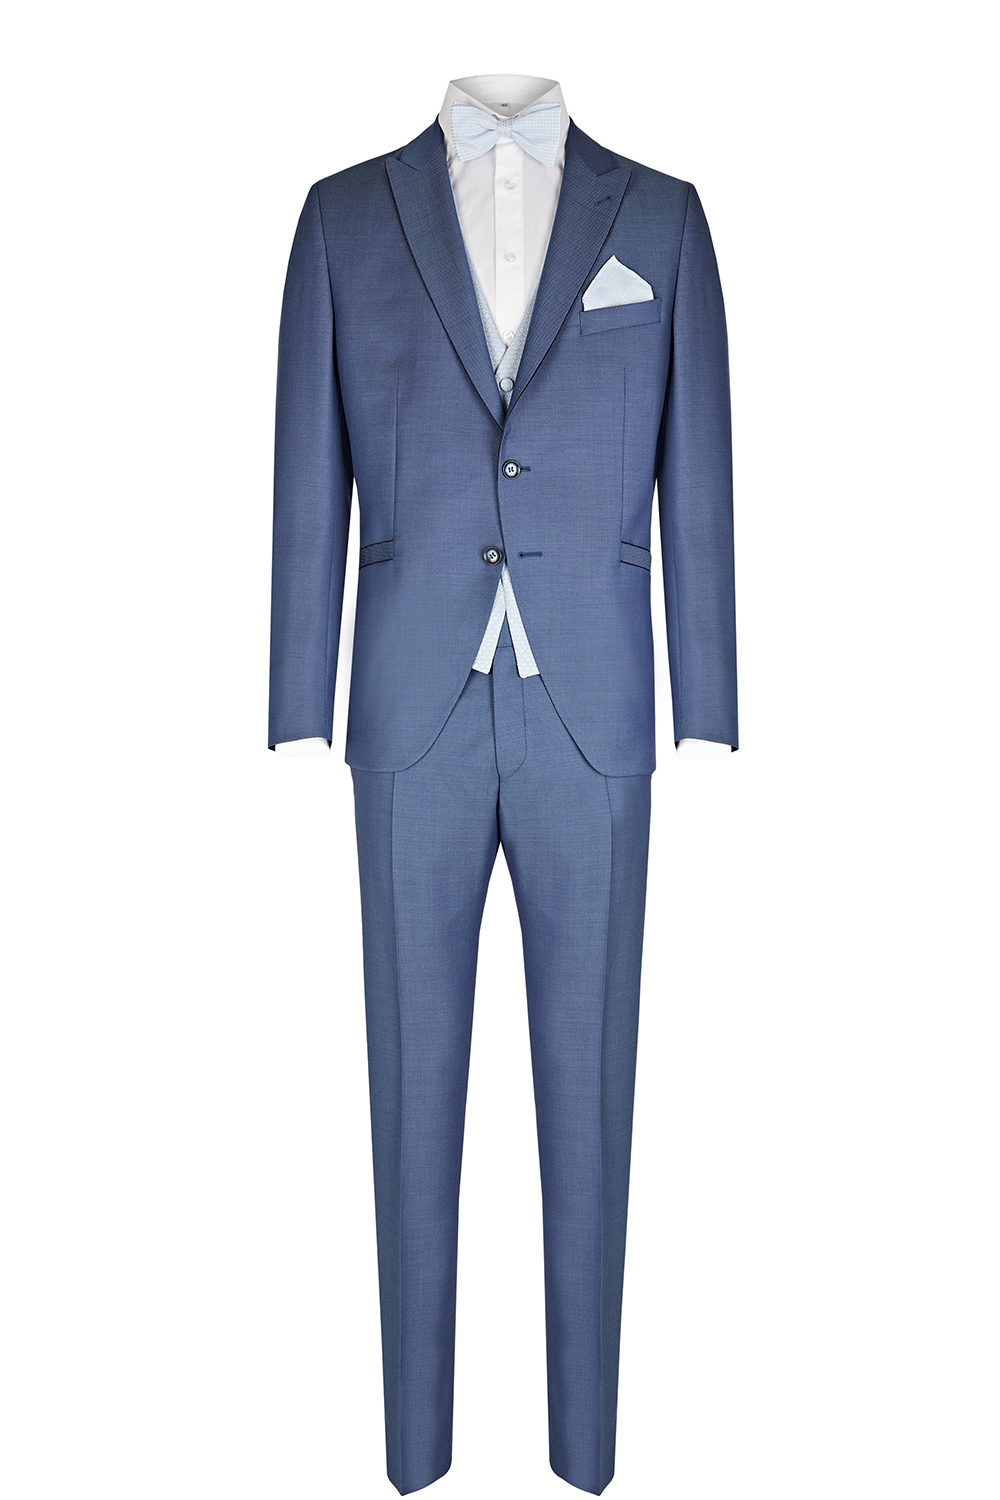 Dolphin Blue 3 piece Wedding Suit - Tom Murphy's Formal and Menswear